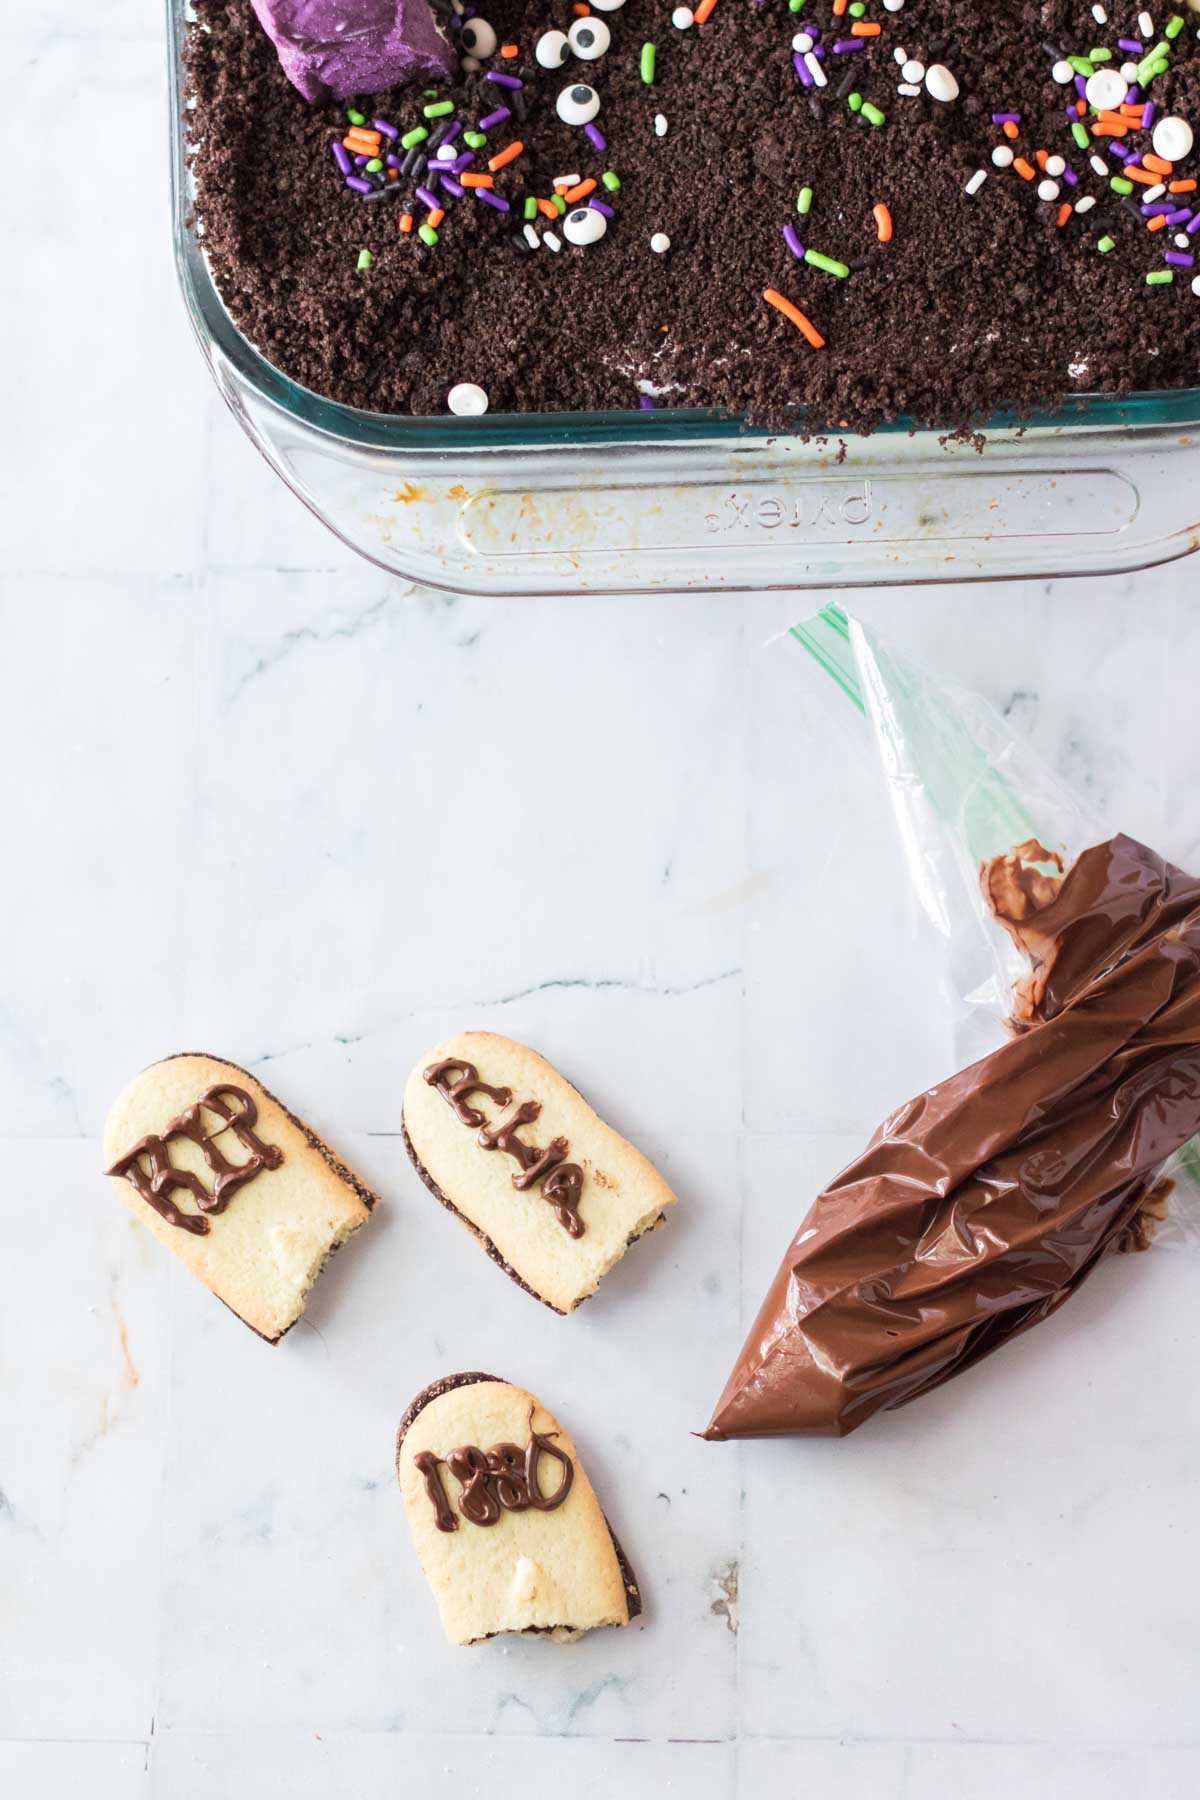 melted chocolate in a bag with Tombstone cookies